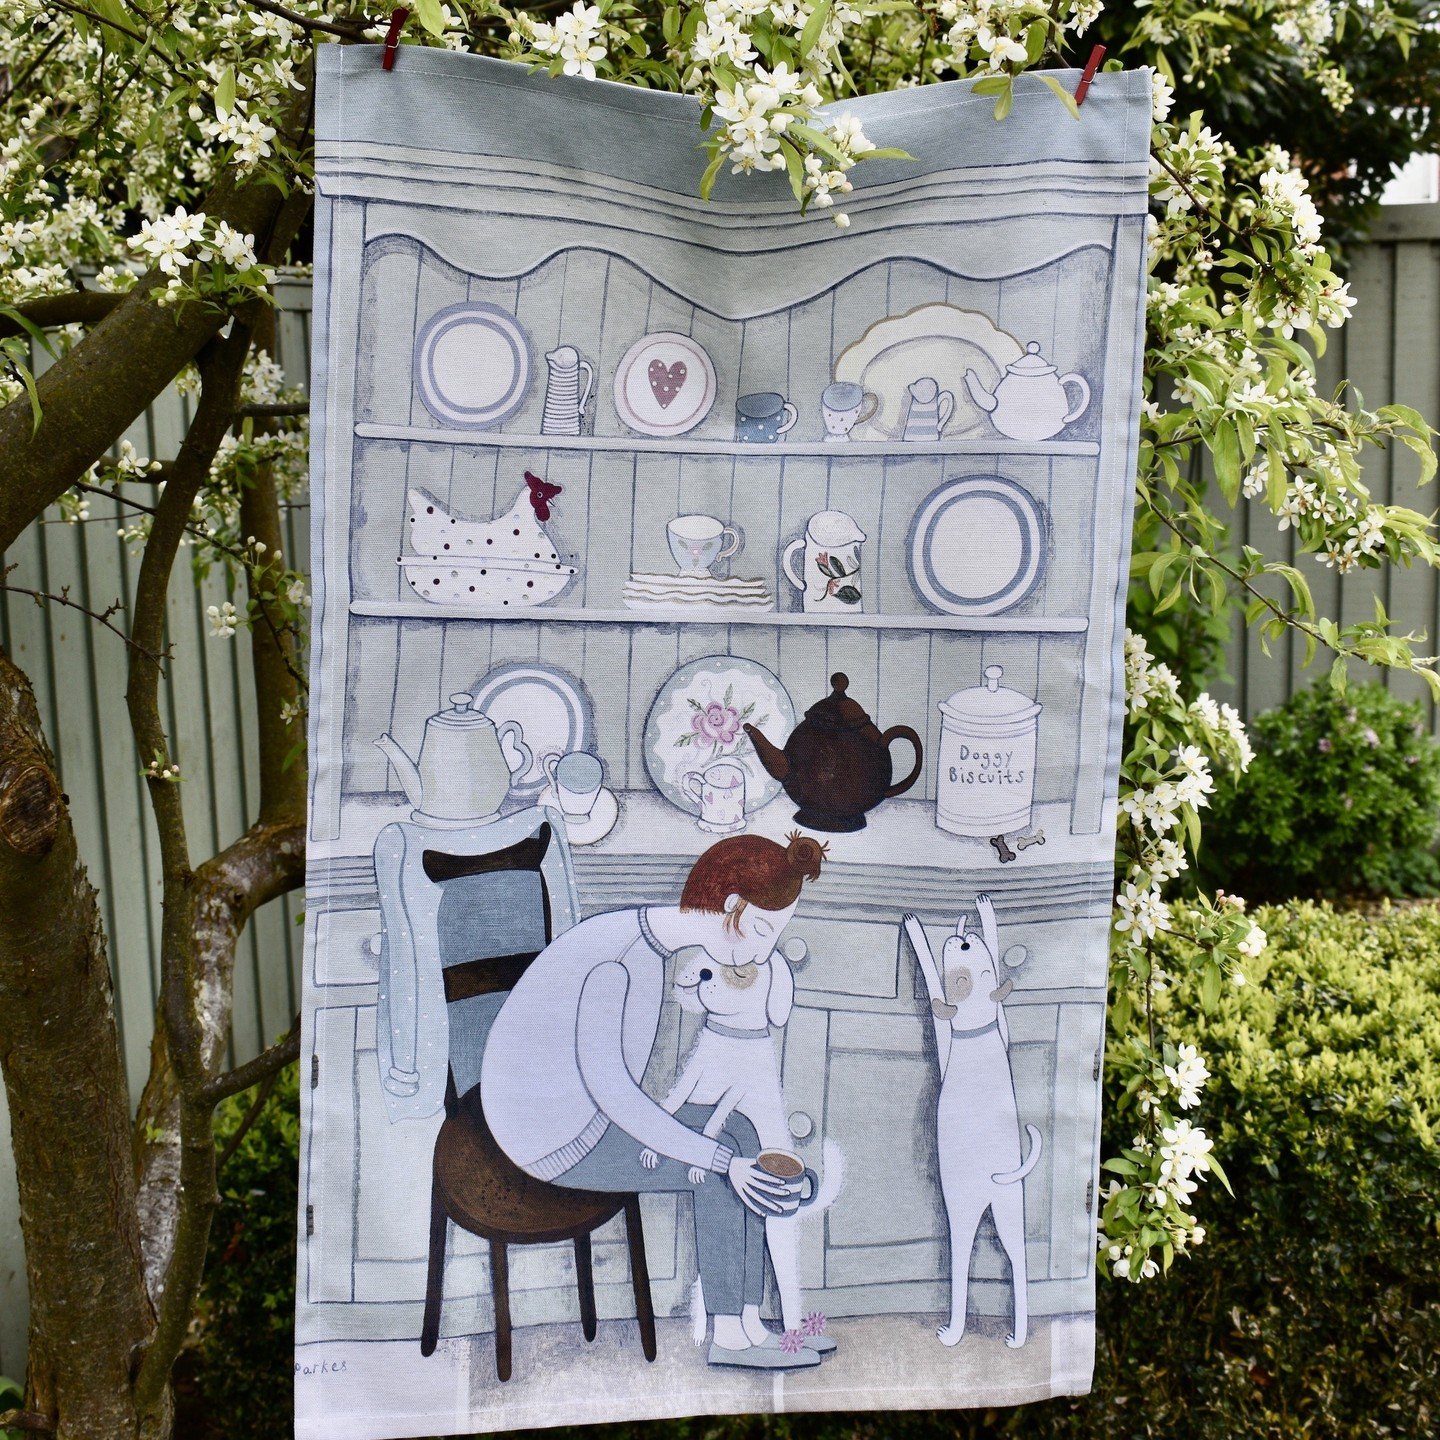 Good afternoon, if you fancy drying your pots with one of these tea towels you can now find them in my @folksyuk shop. ☺️👀 x x x #maniannieart #maniparkes #folksyshop #folksyseller #wraptious #artistteatowel #folksy